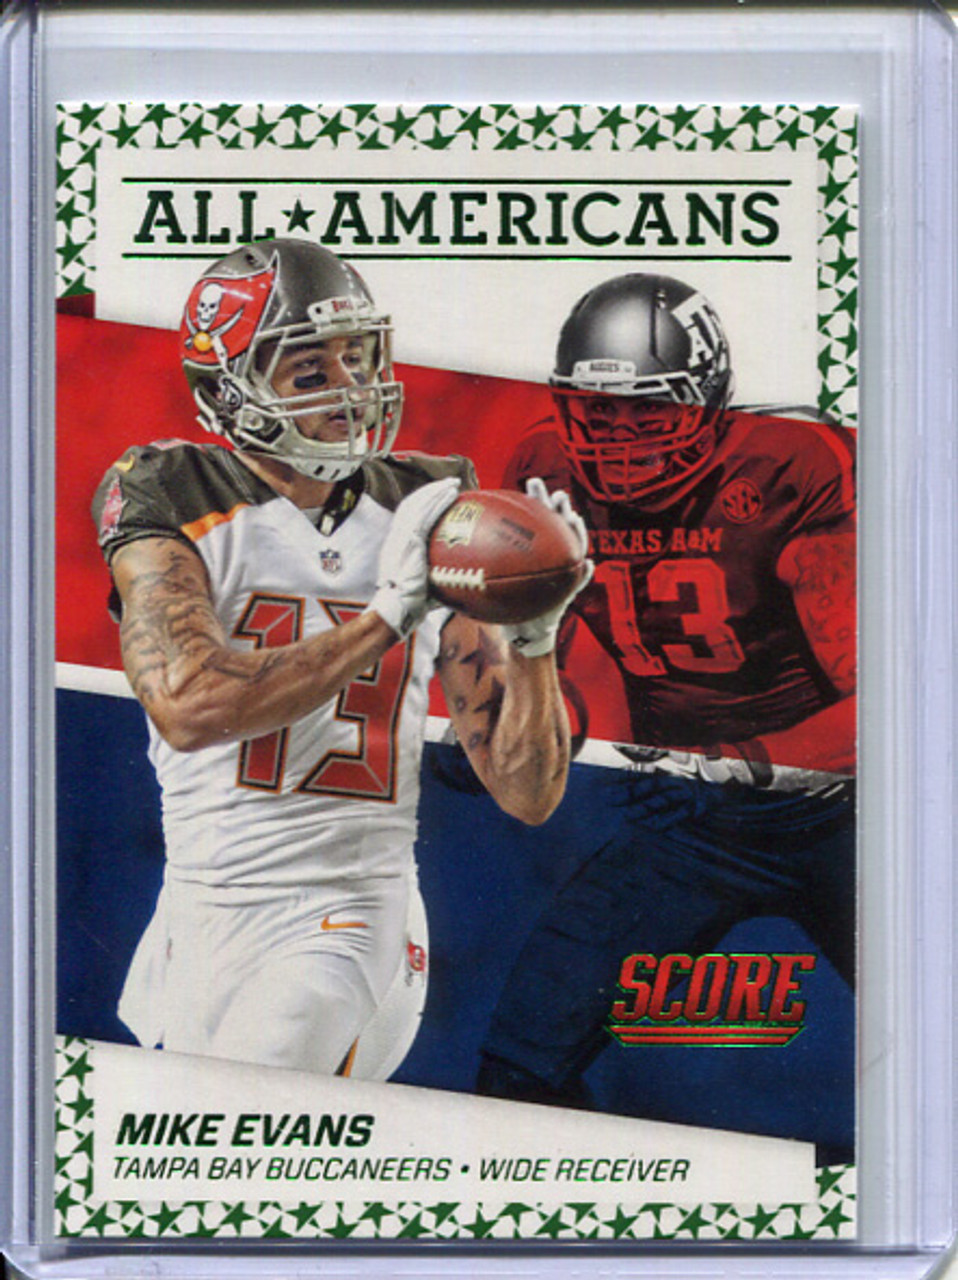 Mike Evans 2016 Score, All Americans #7 Green